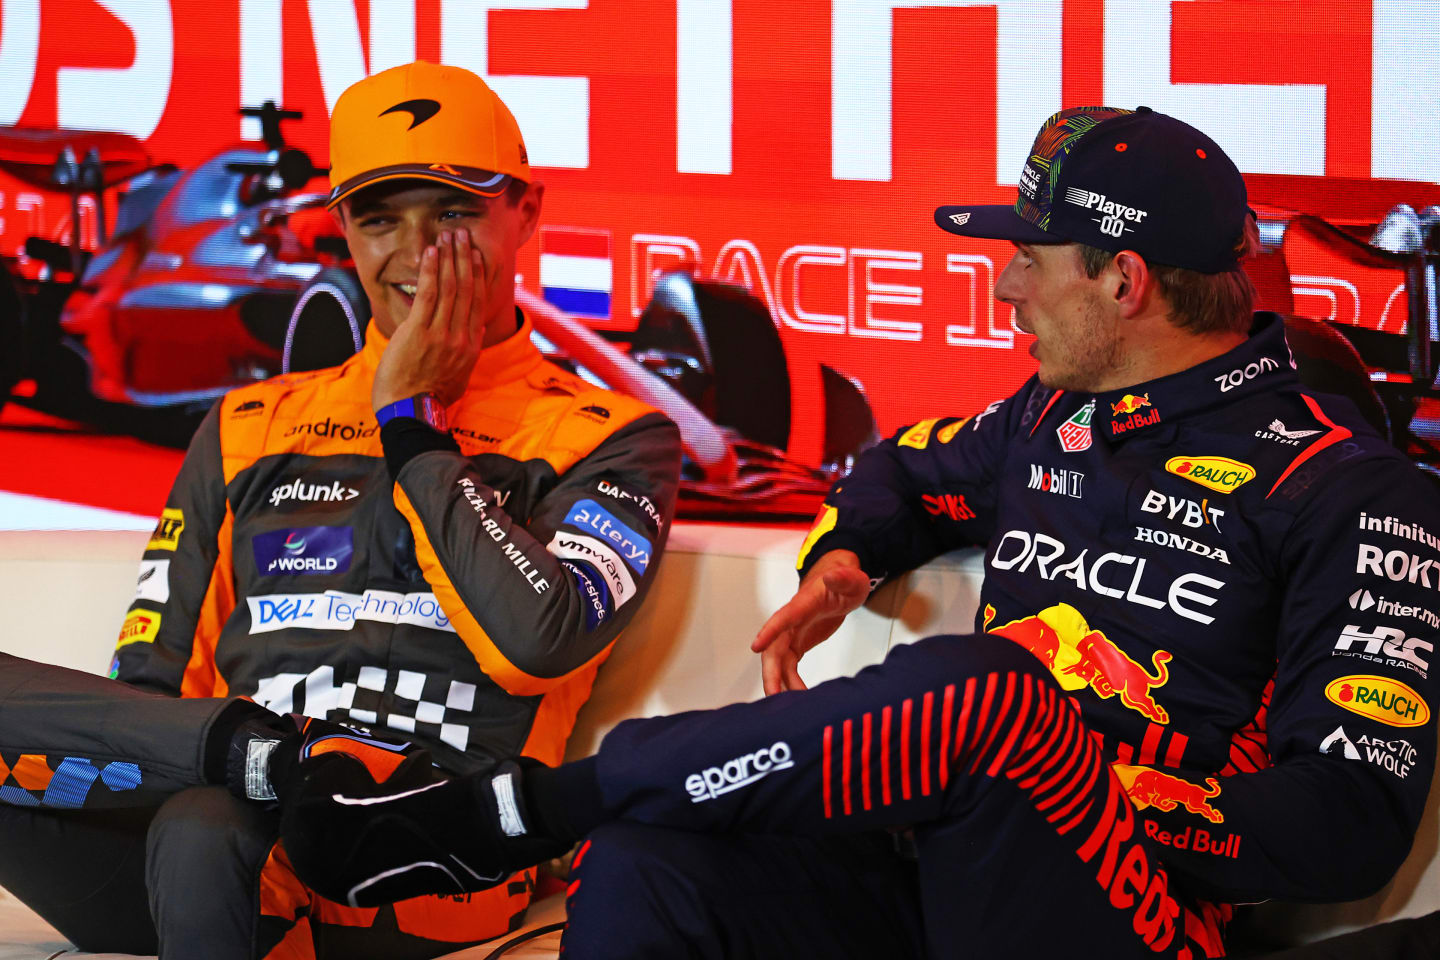 ZANDVOORT, NETHERLANDS - AUGUST 26: Pole position qualifier Max Verstappen of the Netherlands and Oracle Red Bull Racing (R), Second placed qualifier Lando Norris of Great Britain and McLaren (L) and attend the press conference after qualifying ahead of the F1 Grand Prix of The Netherlands at Circuit Zandvoort on August 26, 2023 in Zandvoort, Netherlands. (Photo by Bryn Lennon/Getty Images)